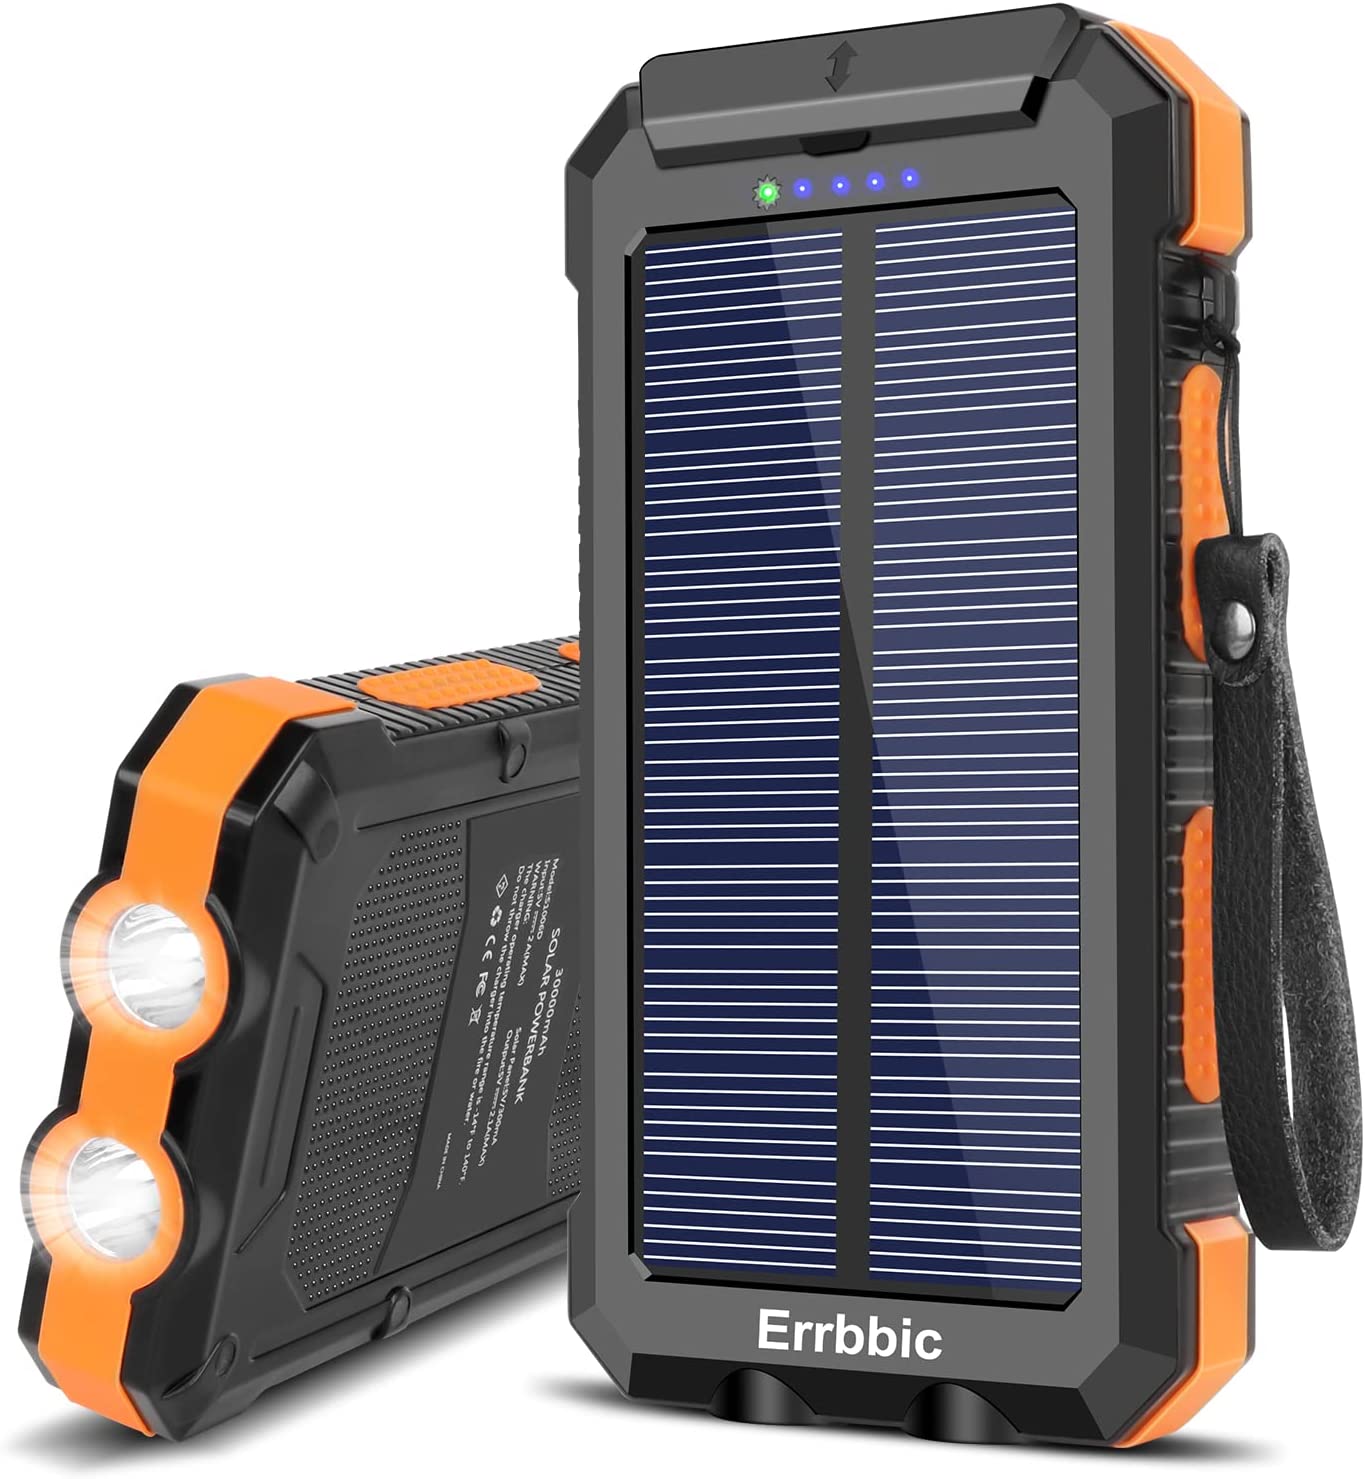 Solar Charger 30000mAh Portable Solar Power Bank for External Backup Battery Power Pack Charger Built-in Type C Input Port and Dual USB/Flashlight for All Cell Phones, Tablets and Electronic Devices